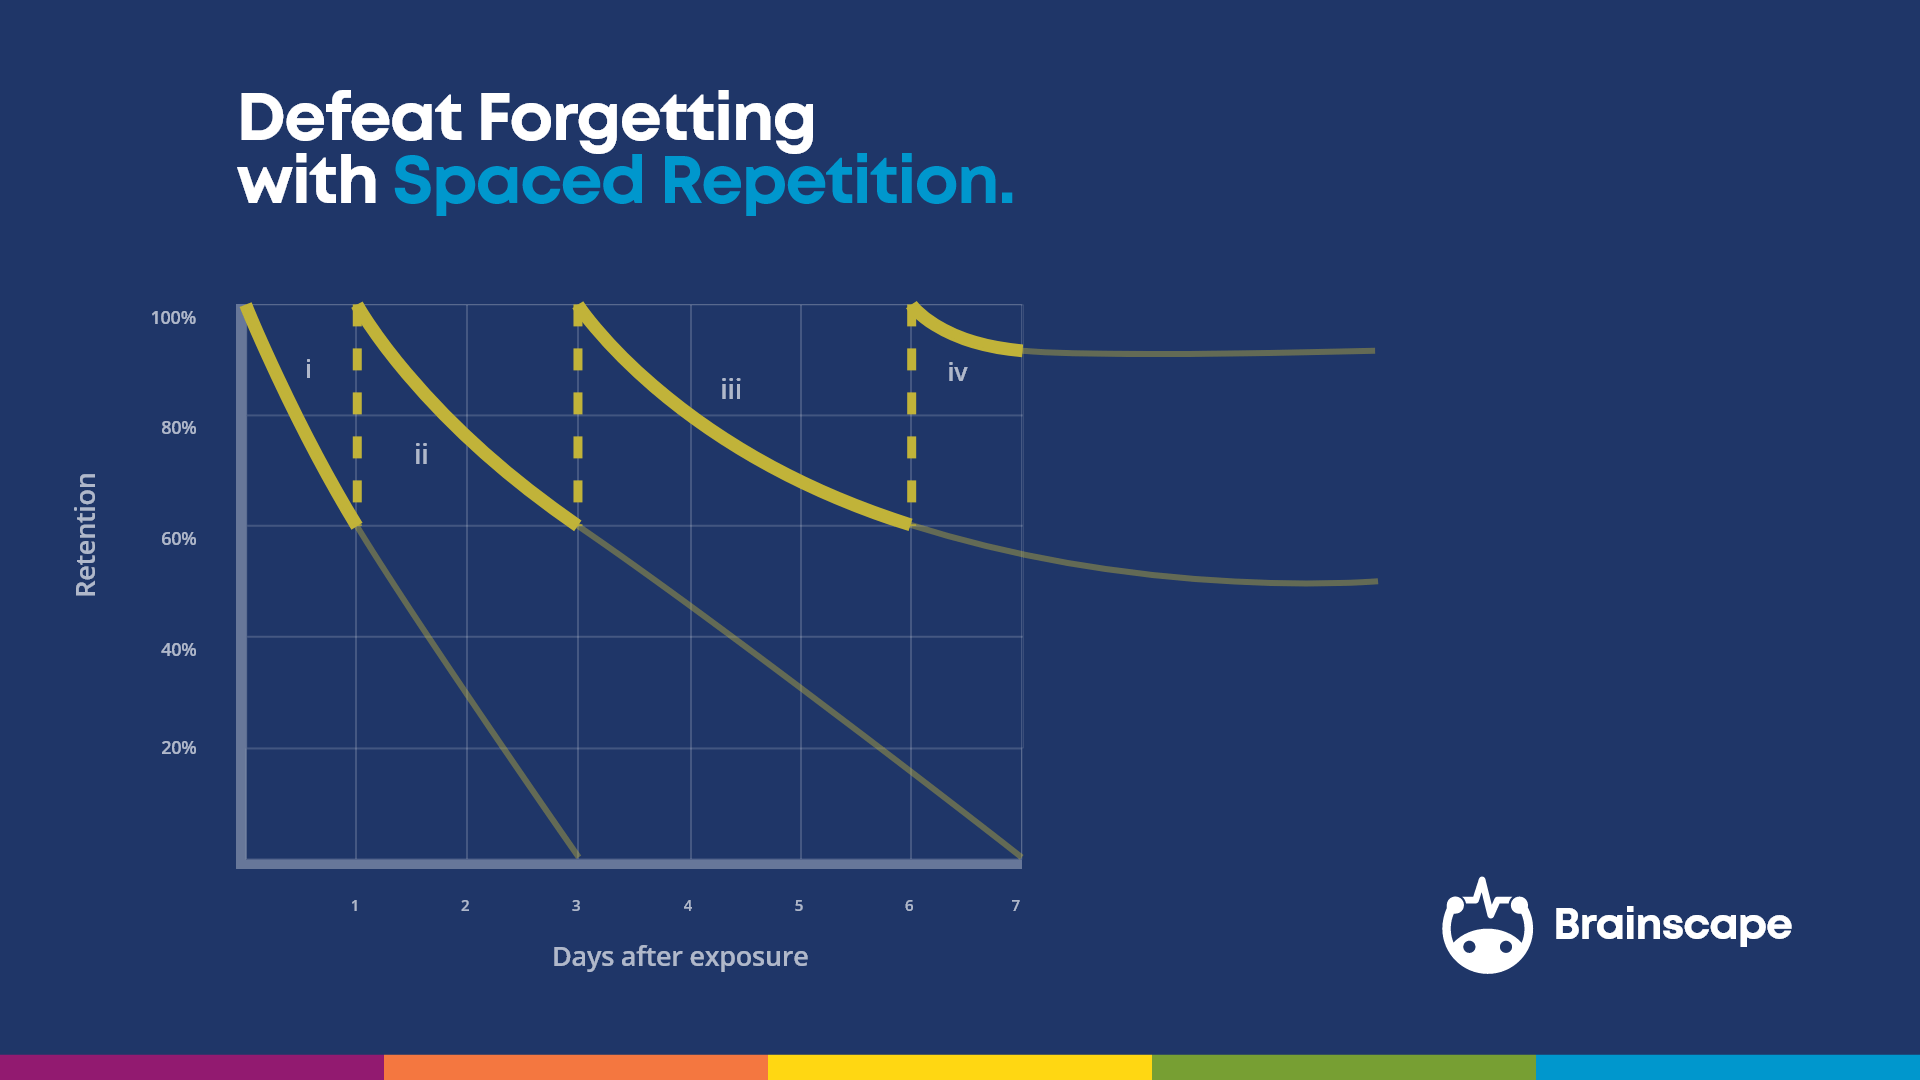 Defeat the forgetting curve with spaced repetition